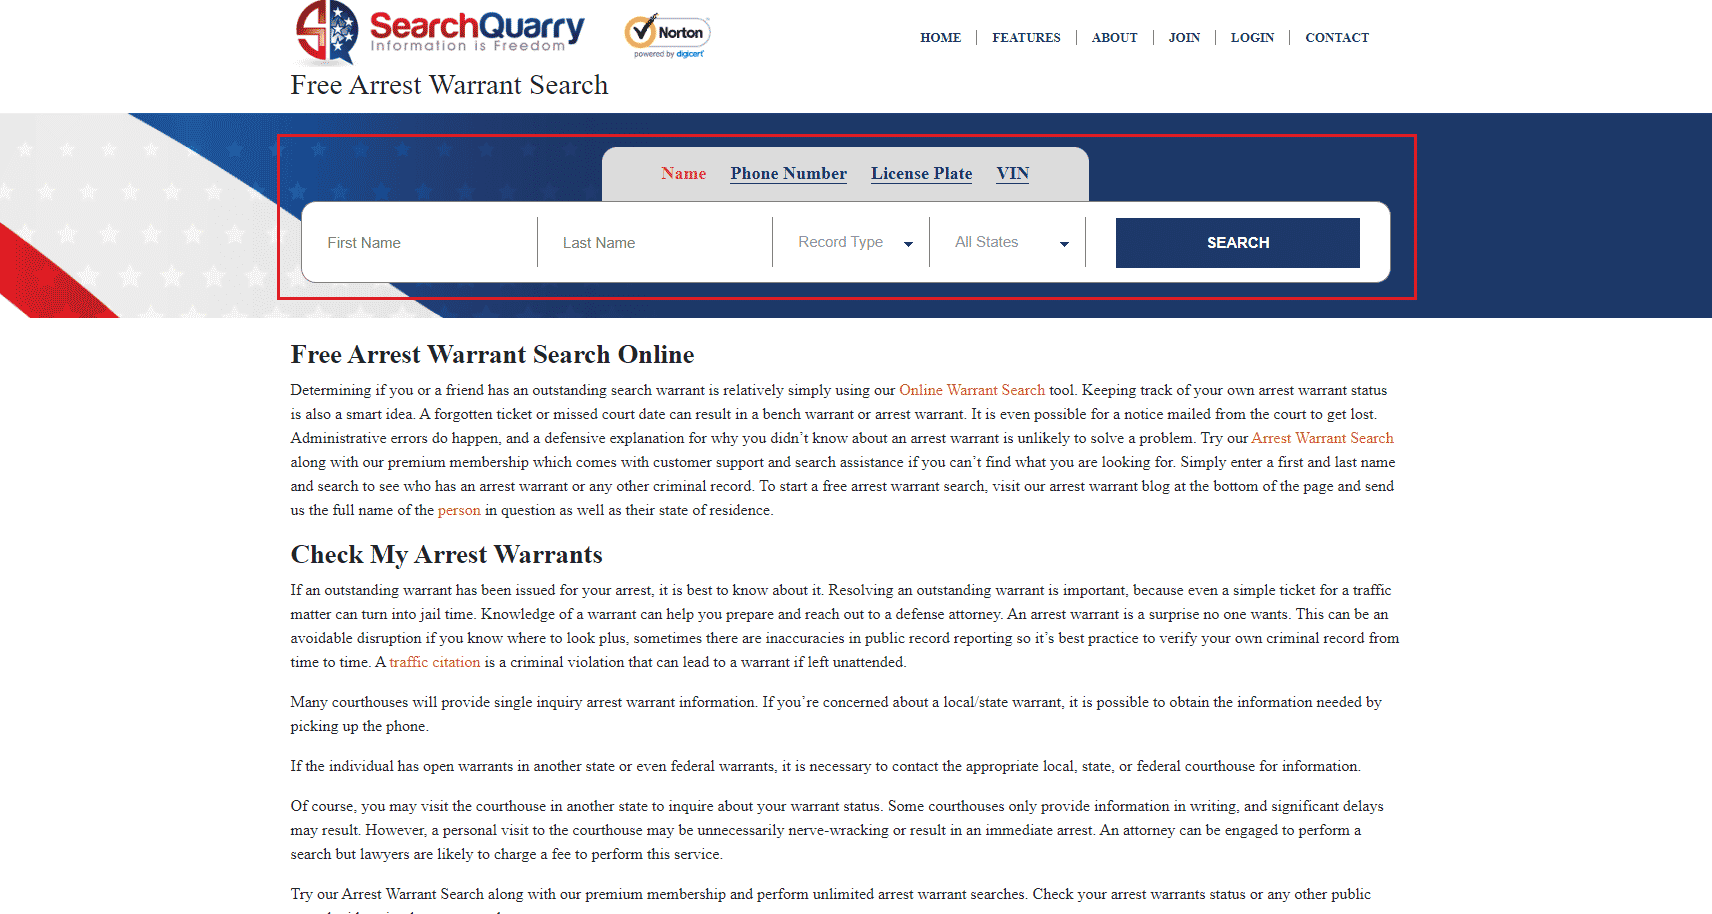 SearchQuarry website